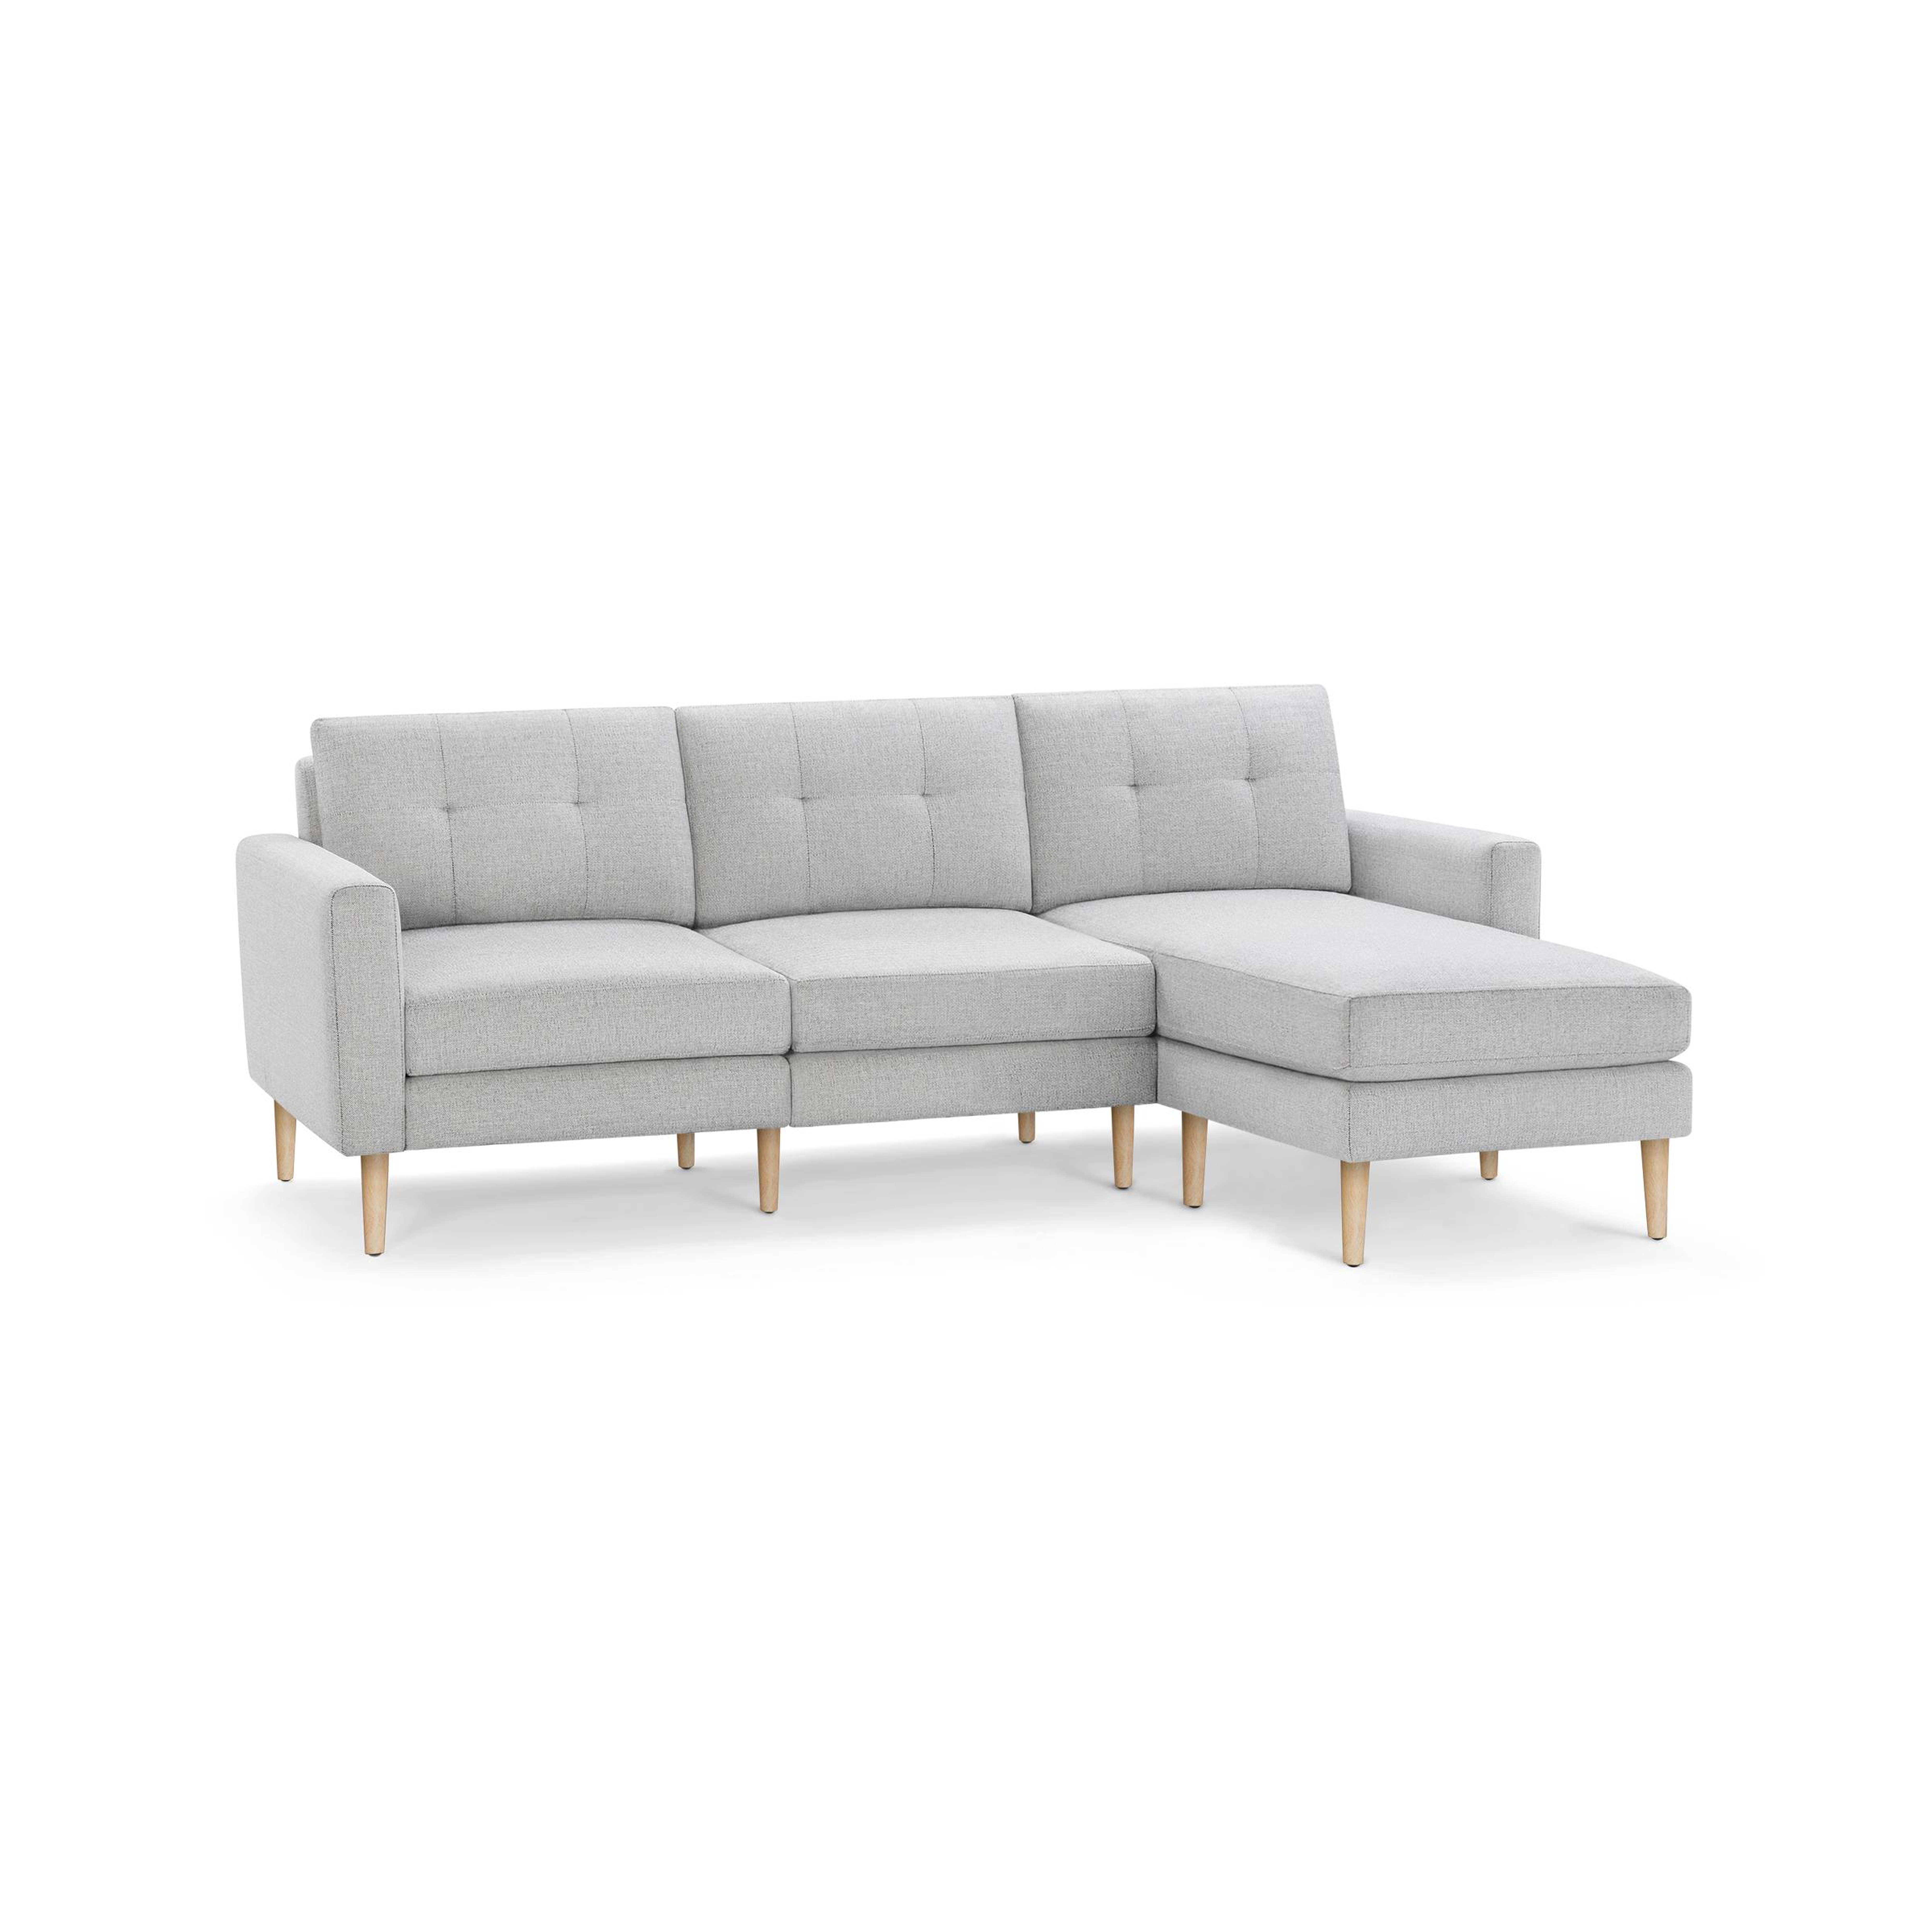 The Block Nomad Sectional Sofa in Crushed Gravel, Oak Legs - Burrow